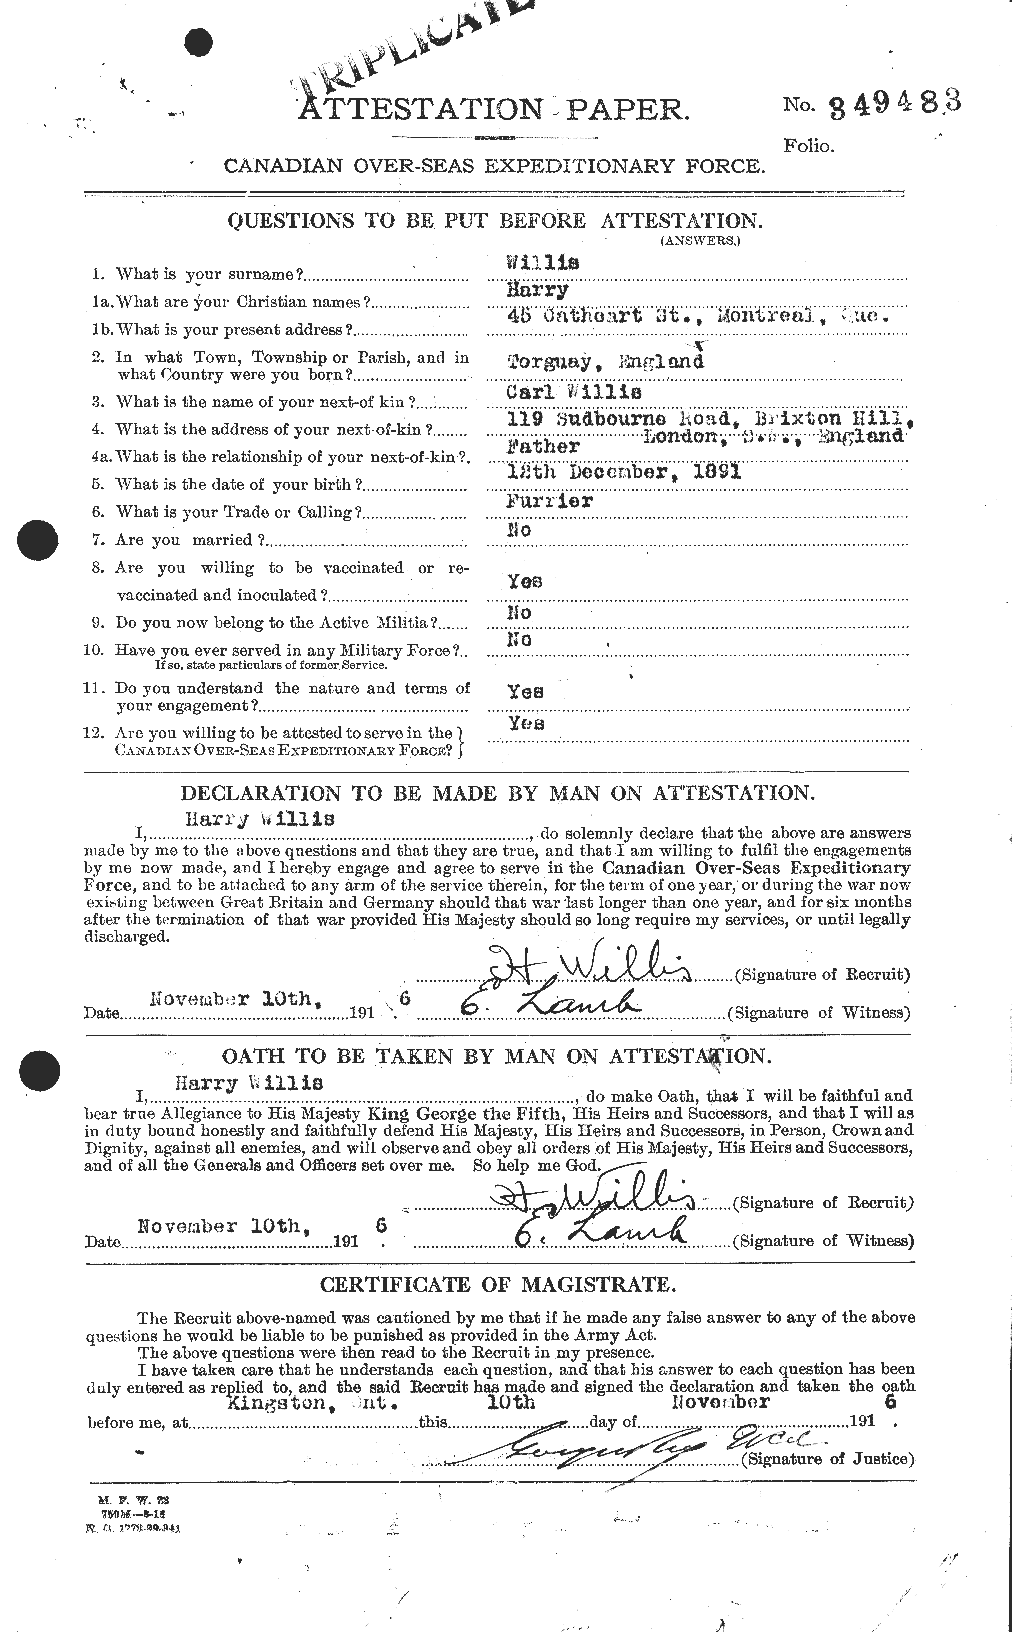 Personnel Records of the First World War - CEF 676464a